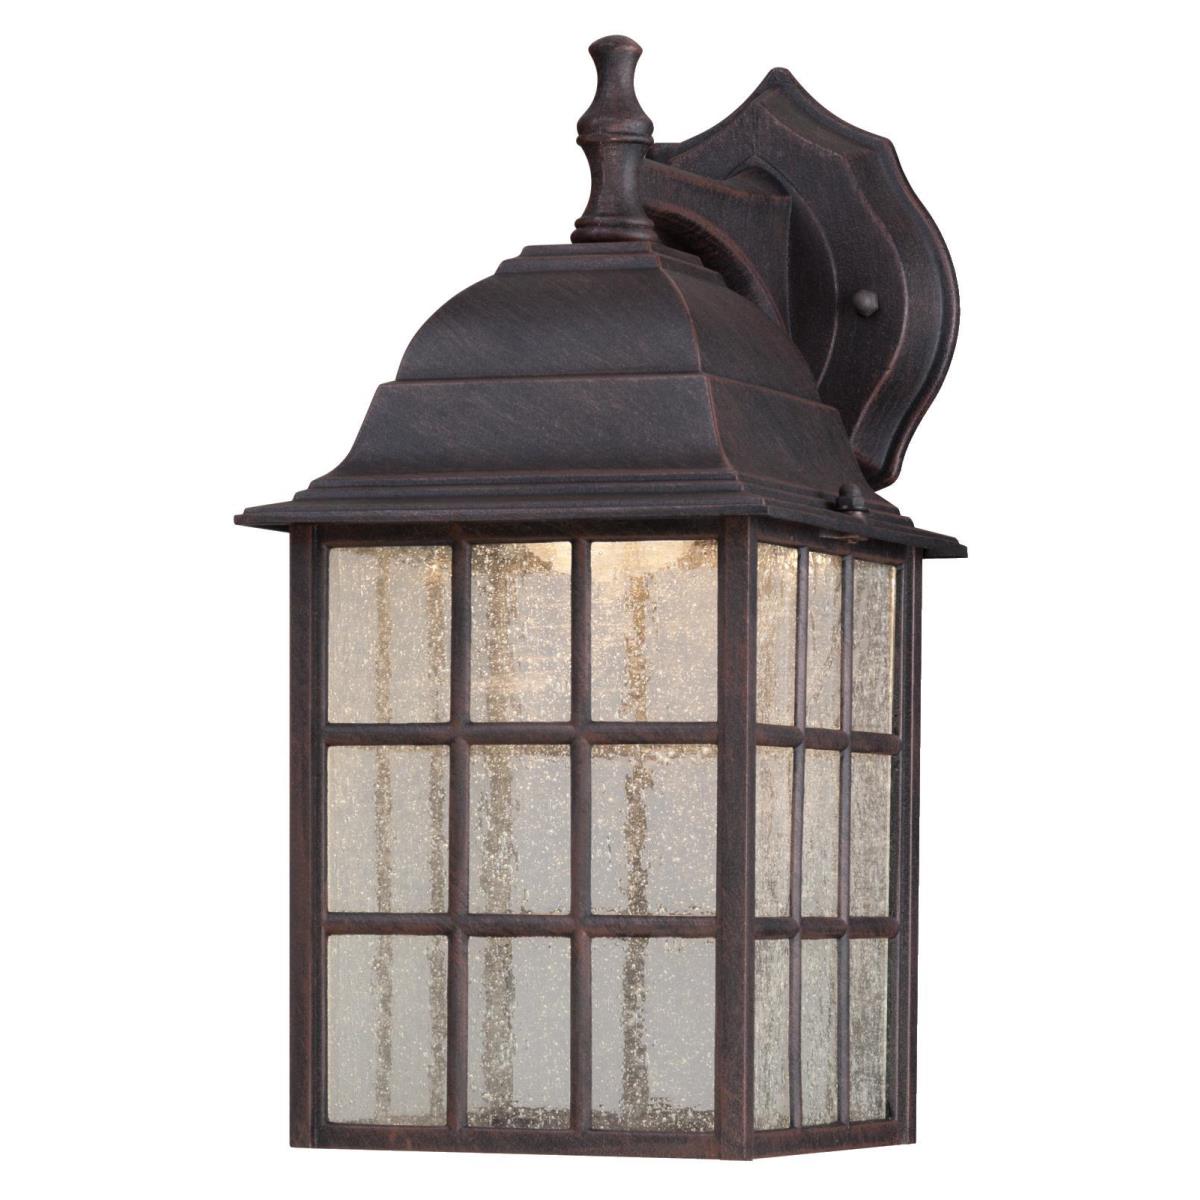 1 Light LED Wall Fixture Weathered Patina Finish with Seeded Glass